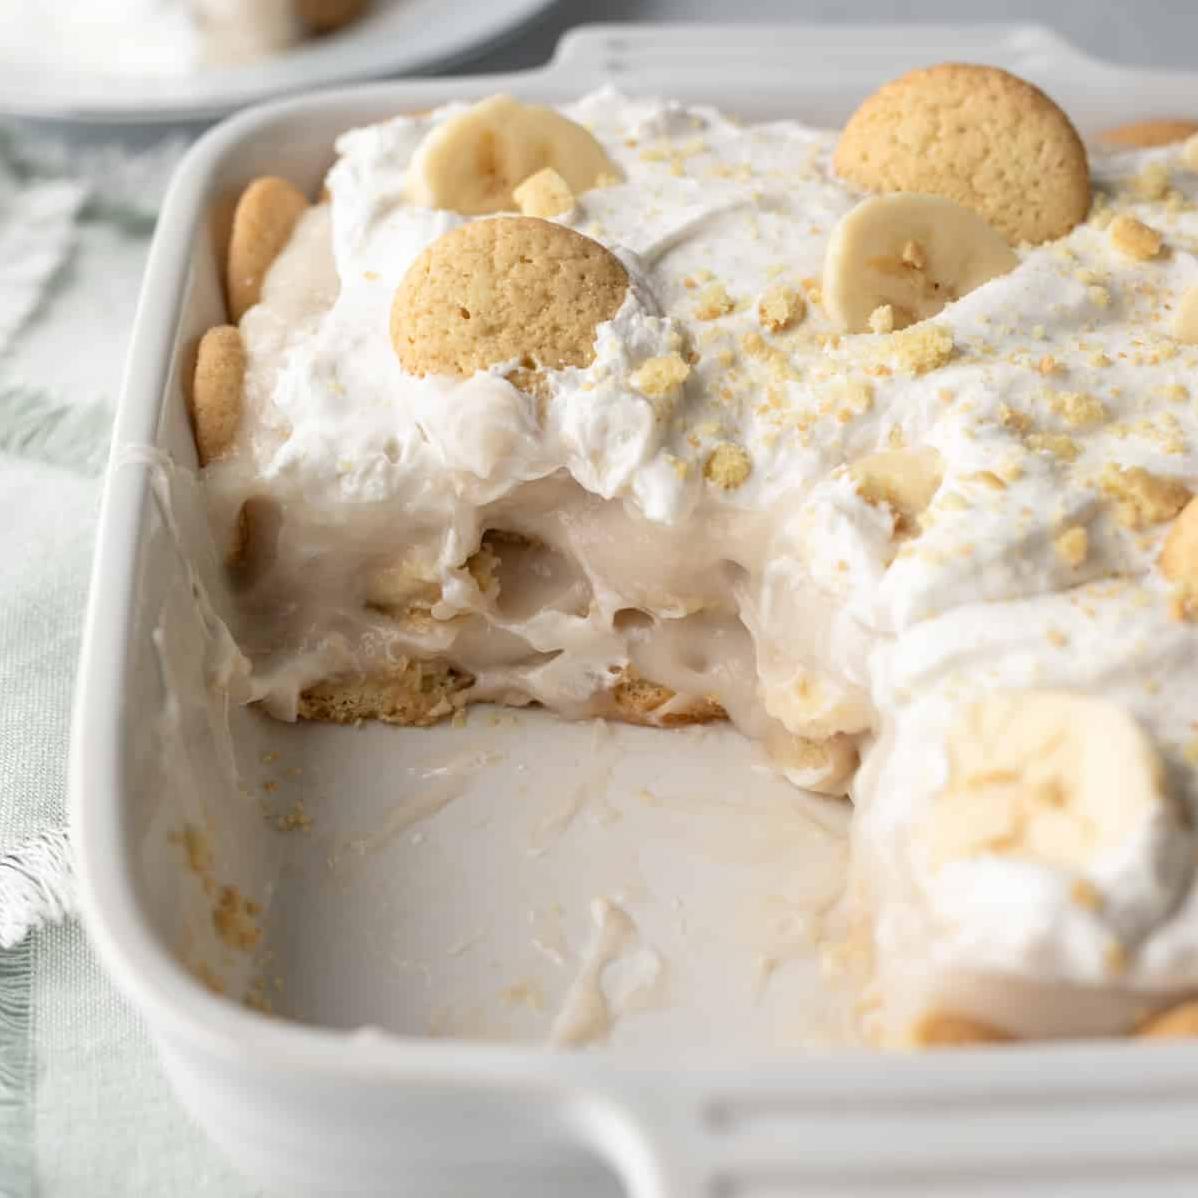  Get ready to dive into a luscious layer of bananas and vanilla pudding – pure bliss!